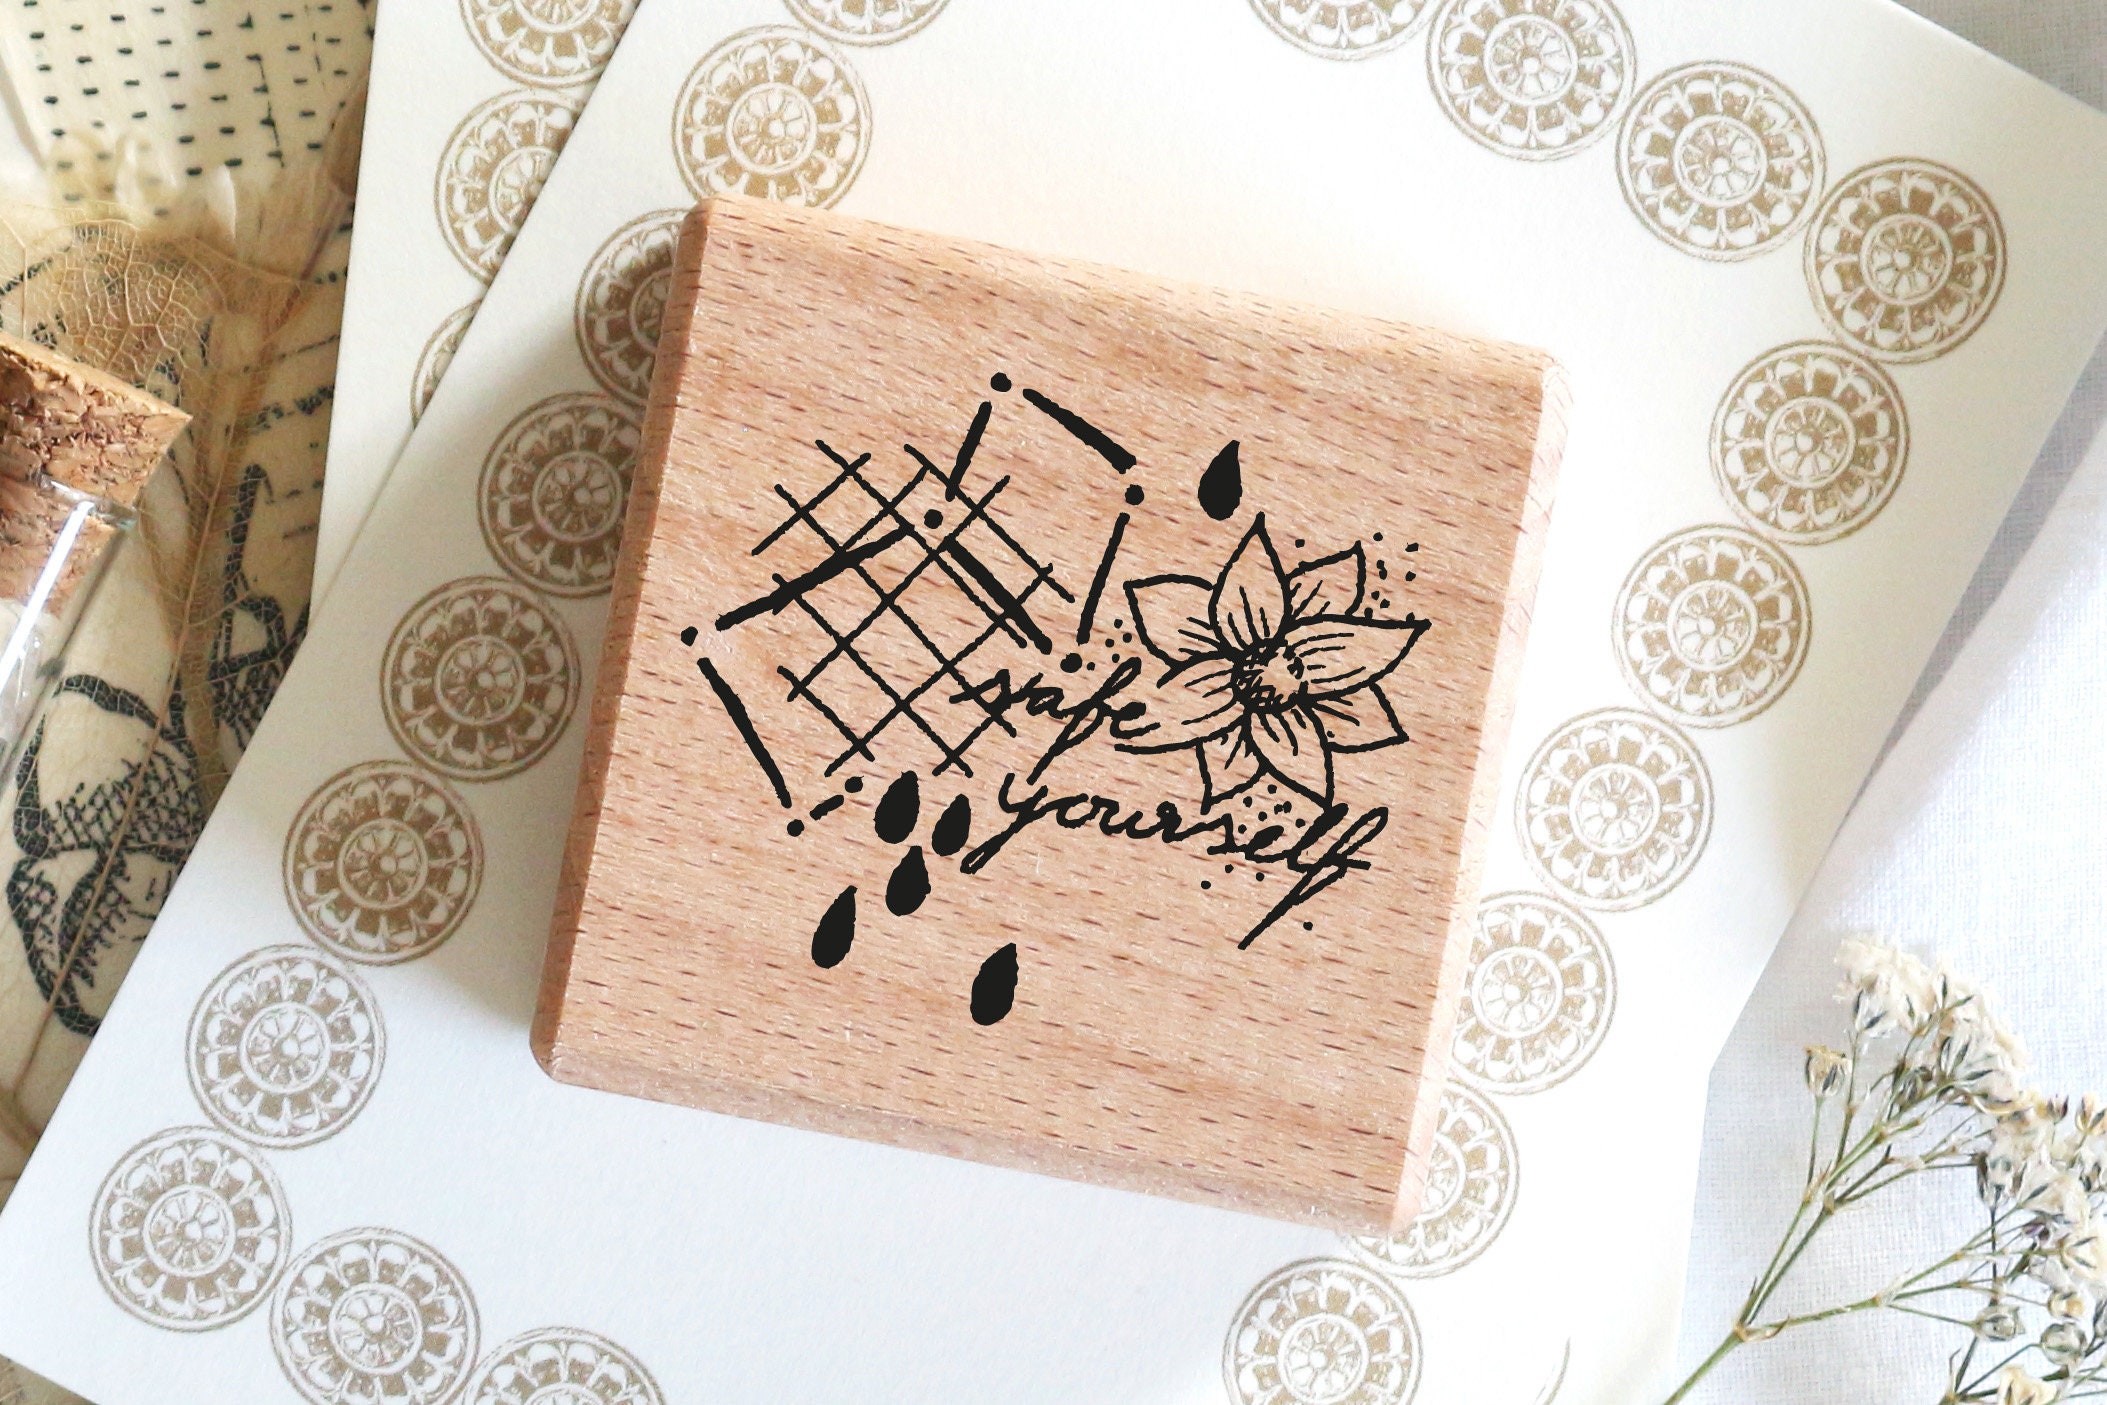 Rubber Stamp Rating With Stars 